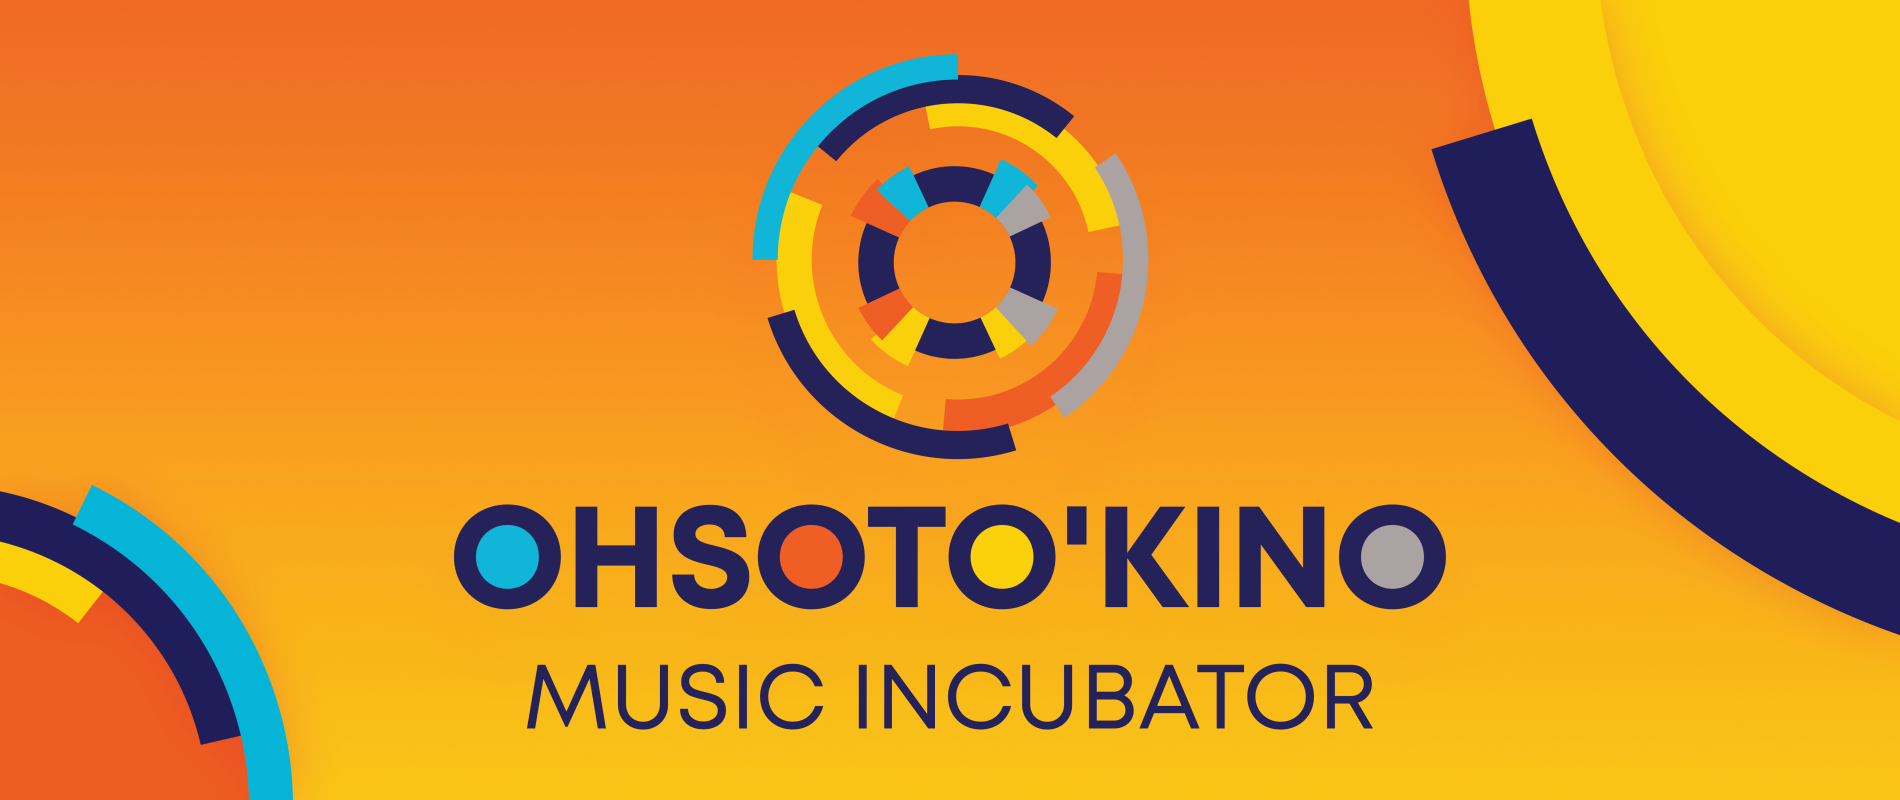 National Music Centre Names Participants of OHSOTO’KINO Music Incubator for Indigenous Artists